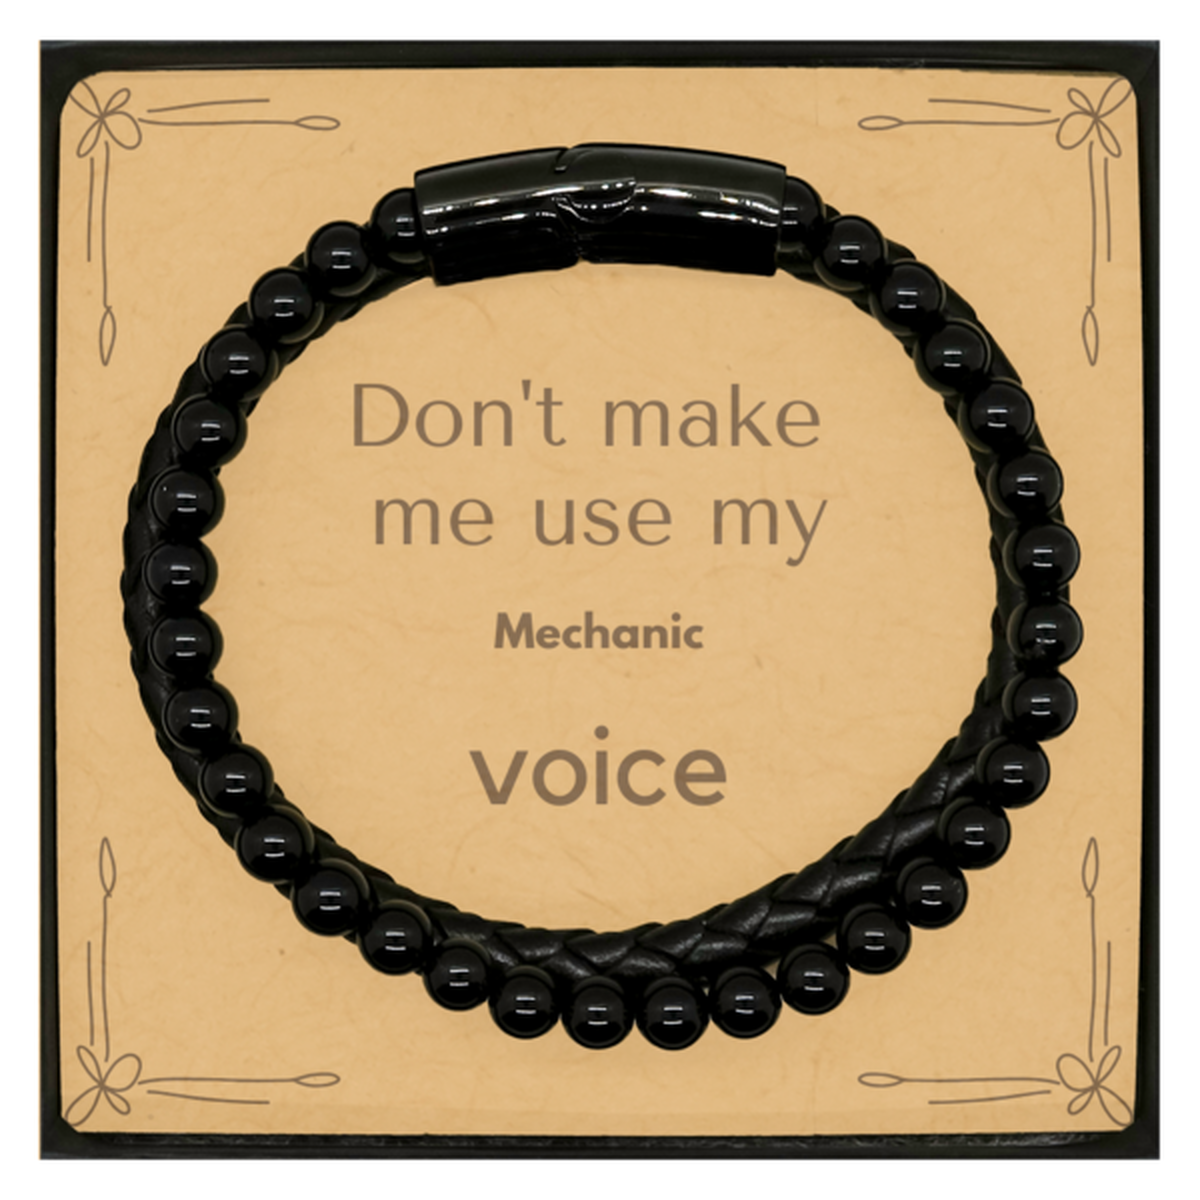 Don't make me use my Mechanic voice, Sarcasm Mechanic Card Gifts, Christmas Mechanic Stone Leather Bracelets Birthday Unique Gifts For Mechanic Coworkers, Men, Women, Colleague, Friends